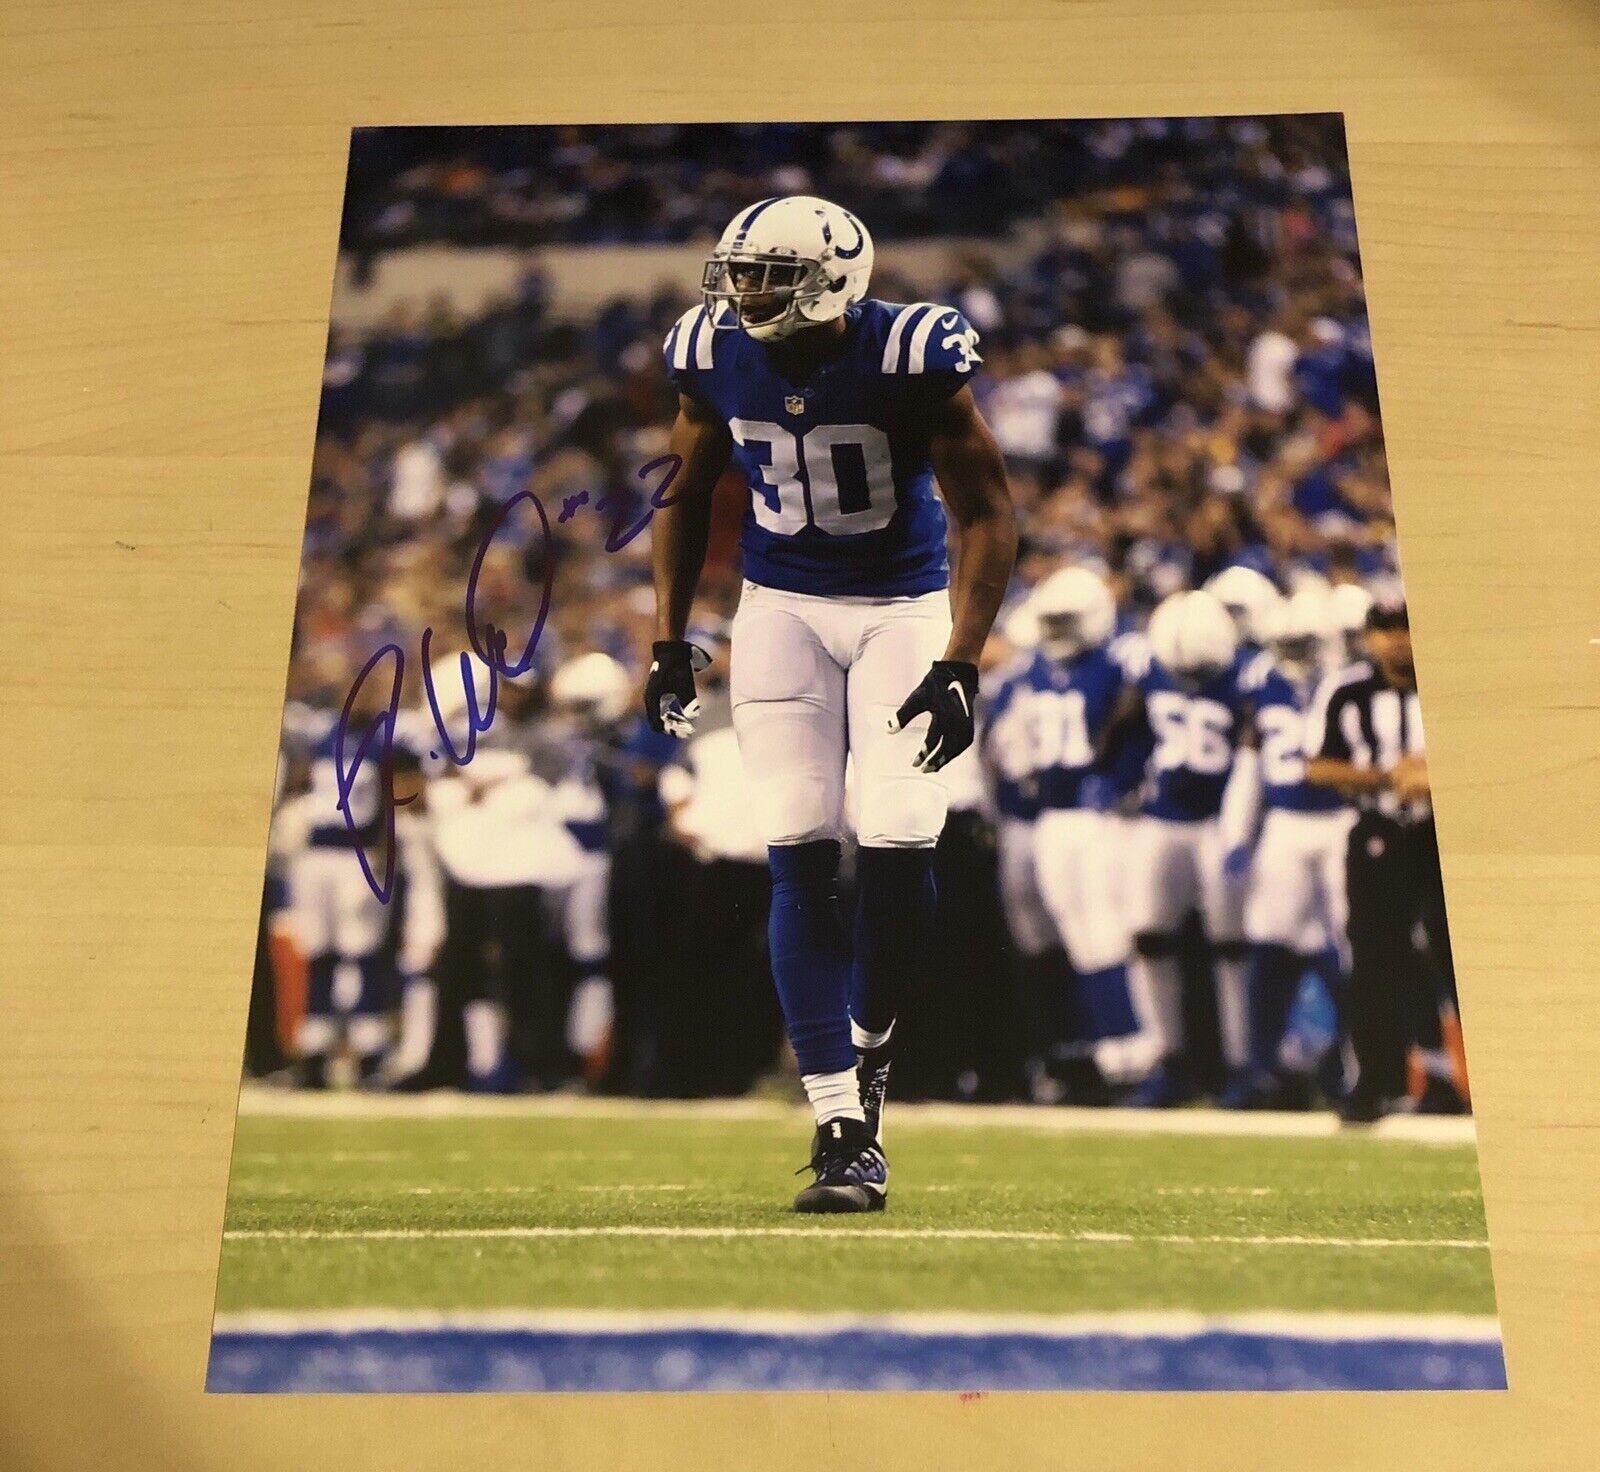 Rashaan Melvin Detroit Lions Autographed Signed 8X10 Photo Poster painting W/COA & Proof Pic